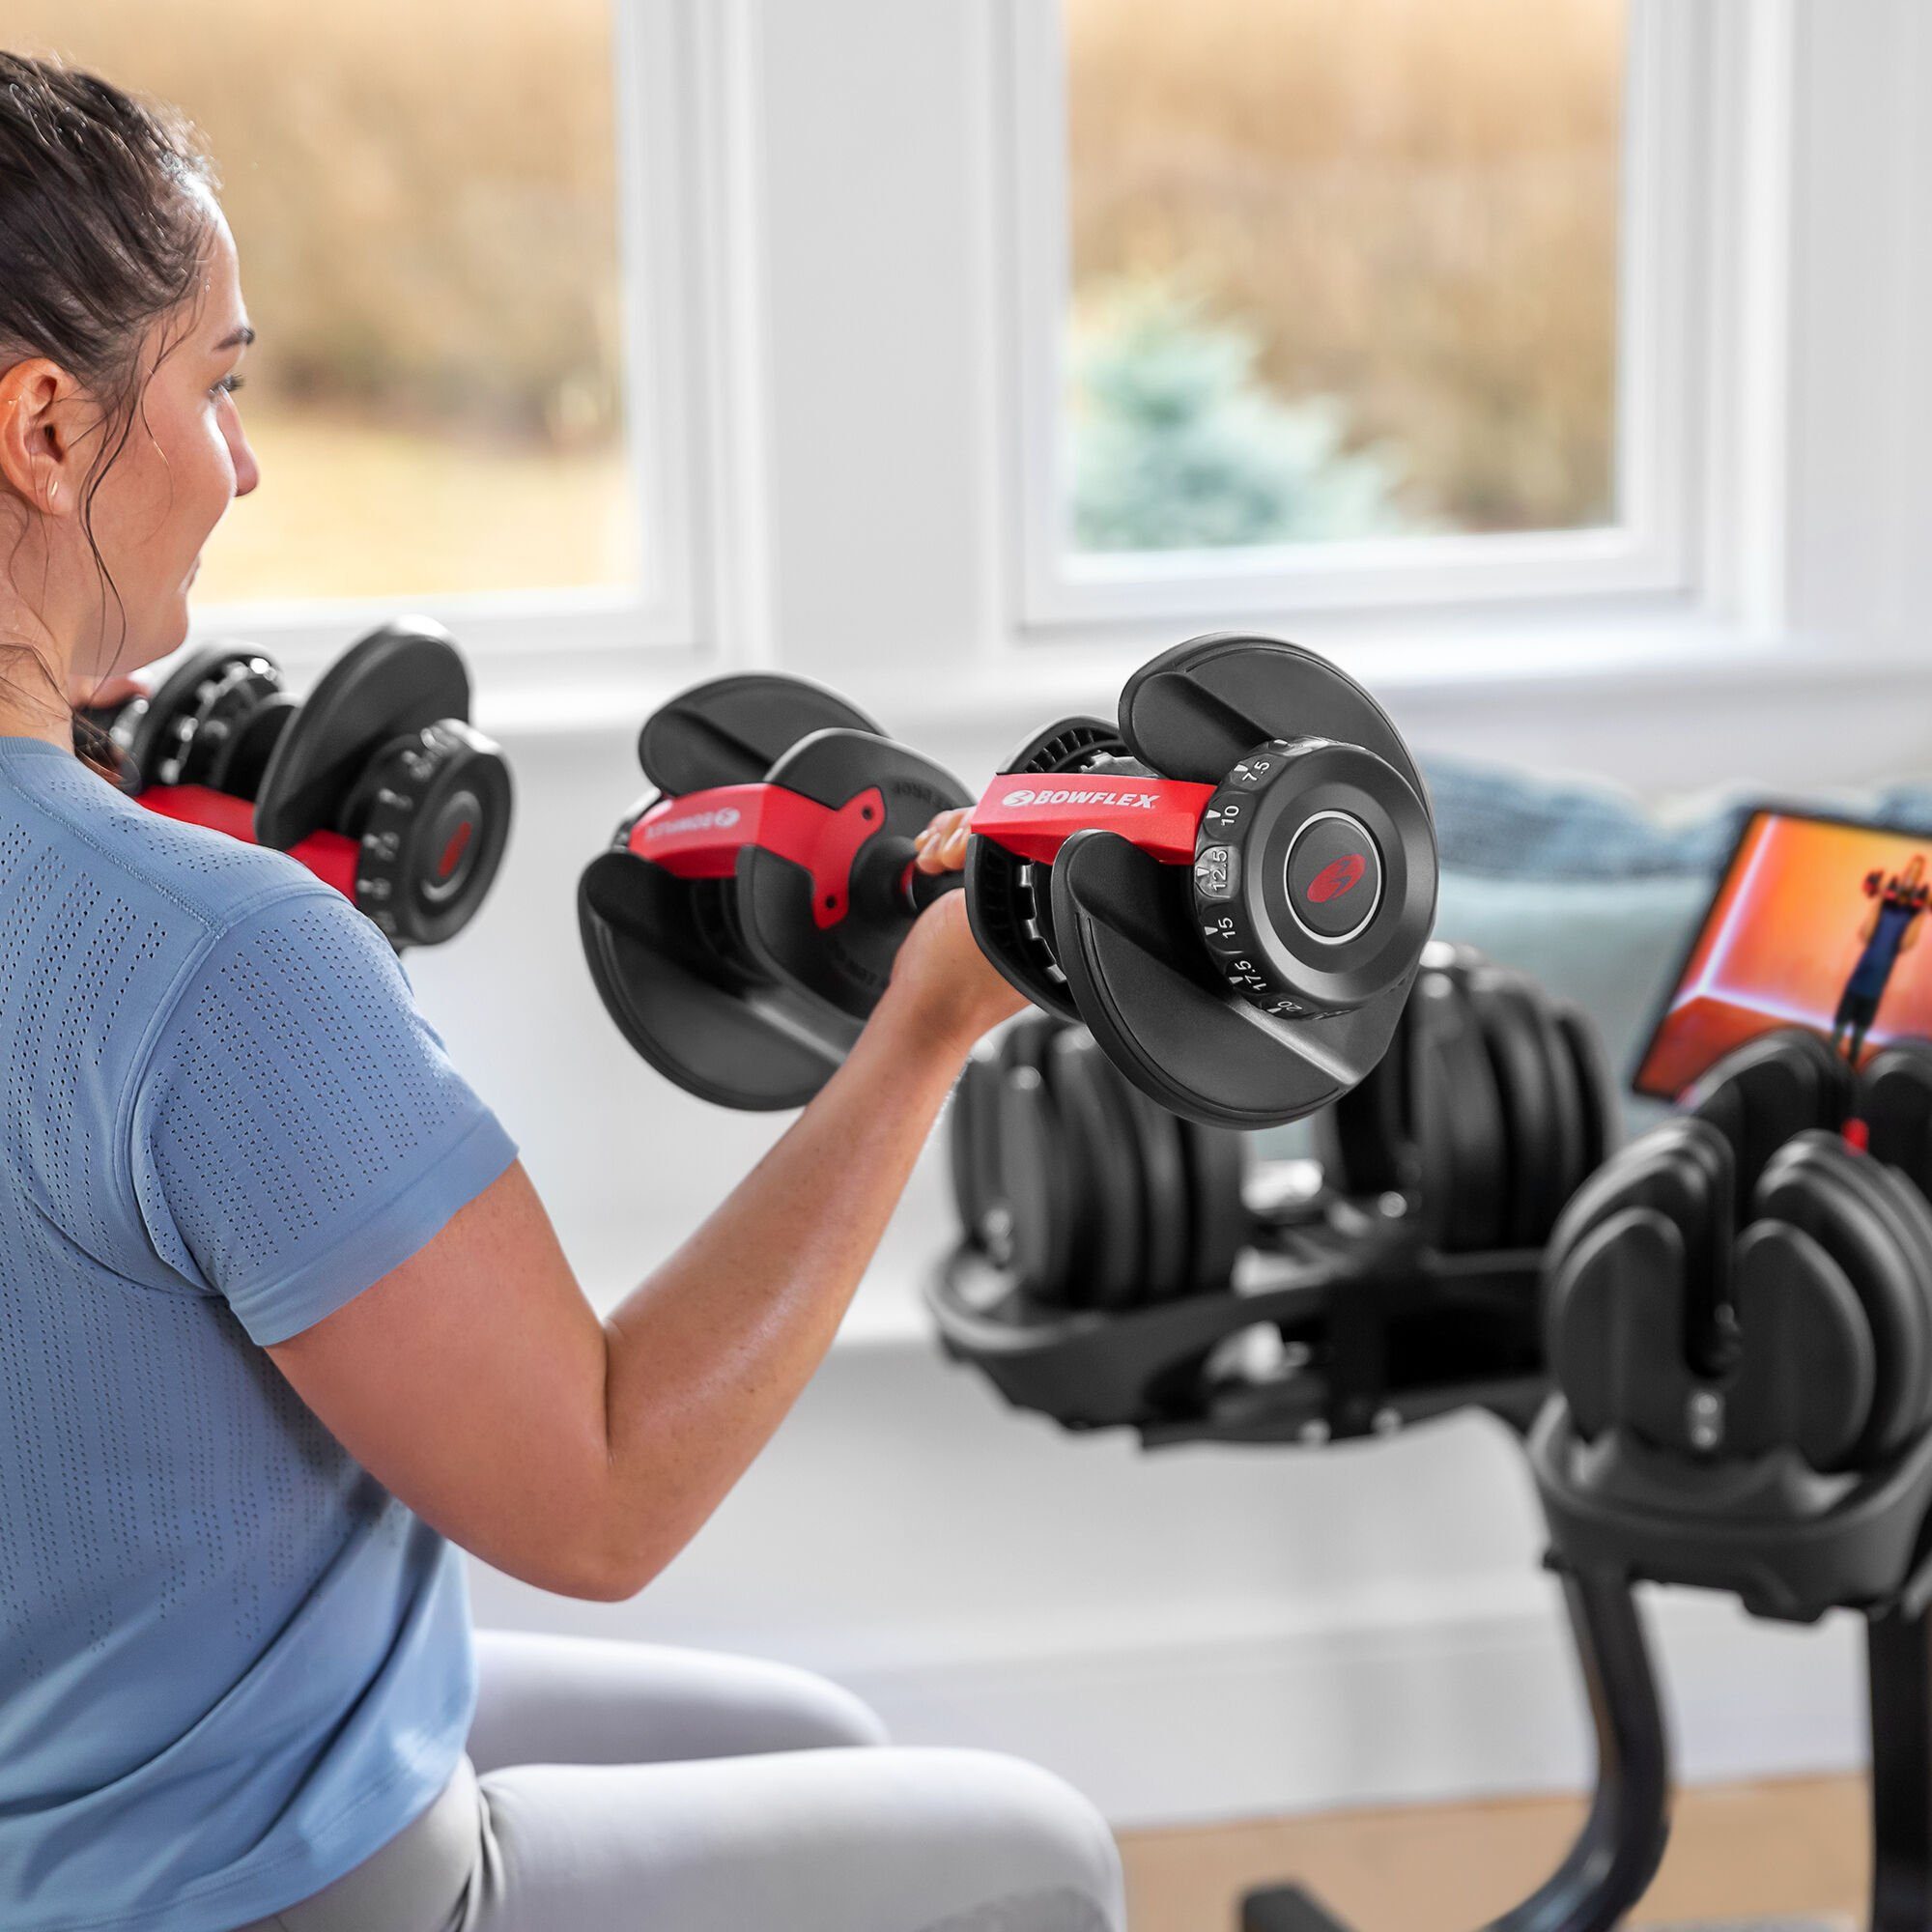 A Trainer Says These Adjustable Dumbbells Are Your "Best Investment"